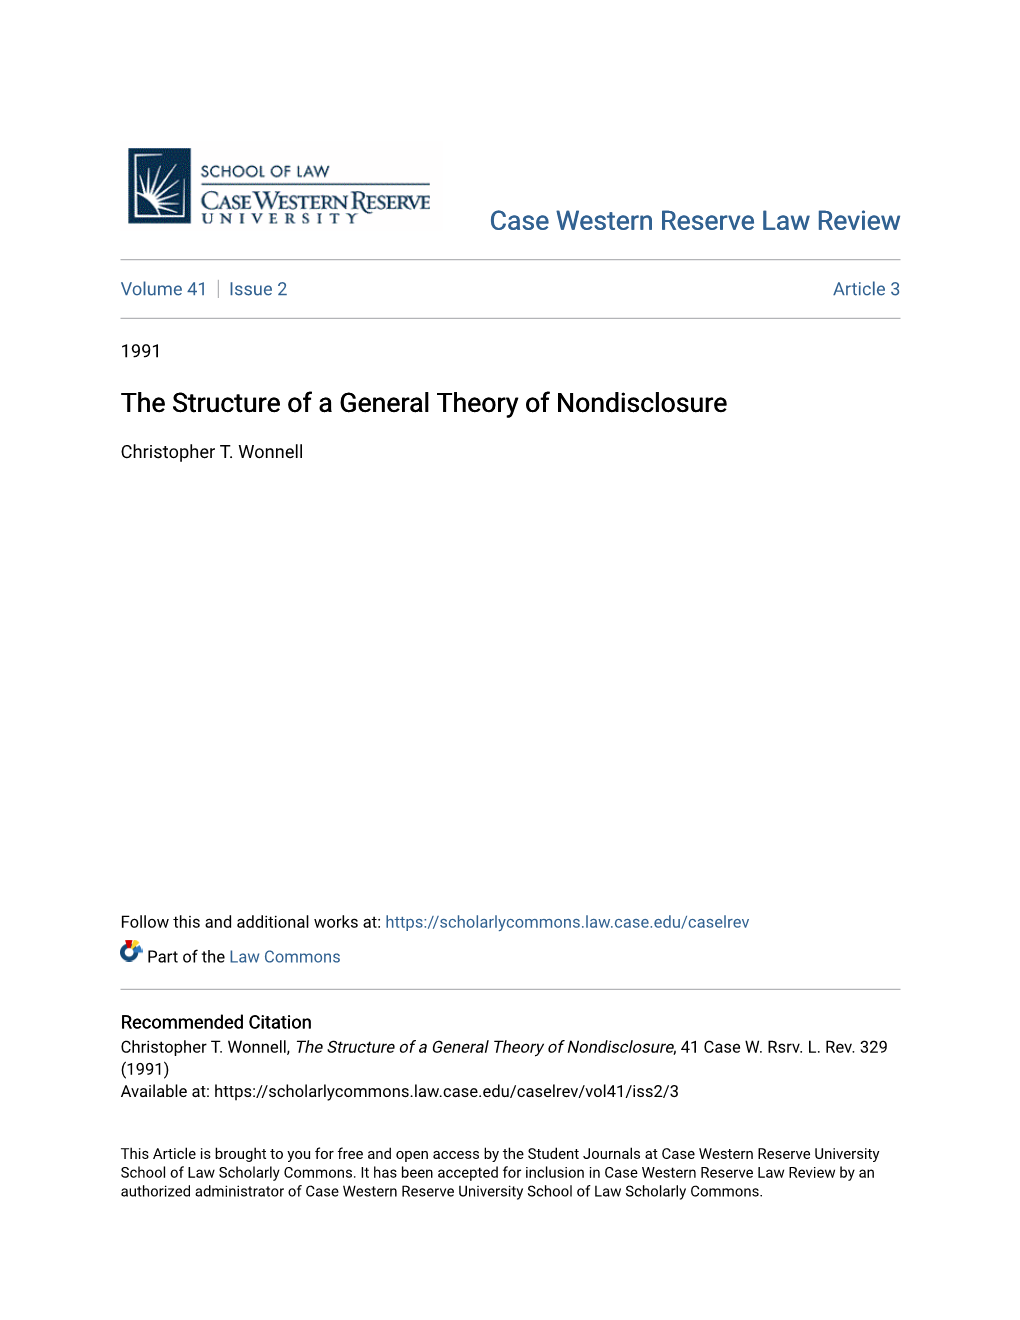 The Structure of a General Theory of Nondisclosure